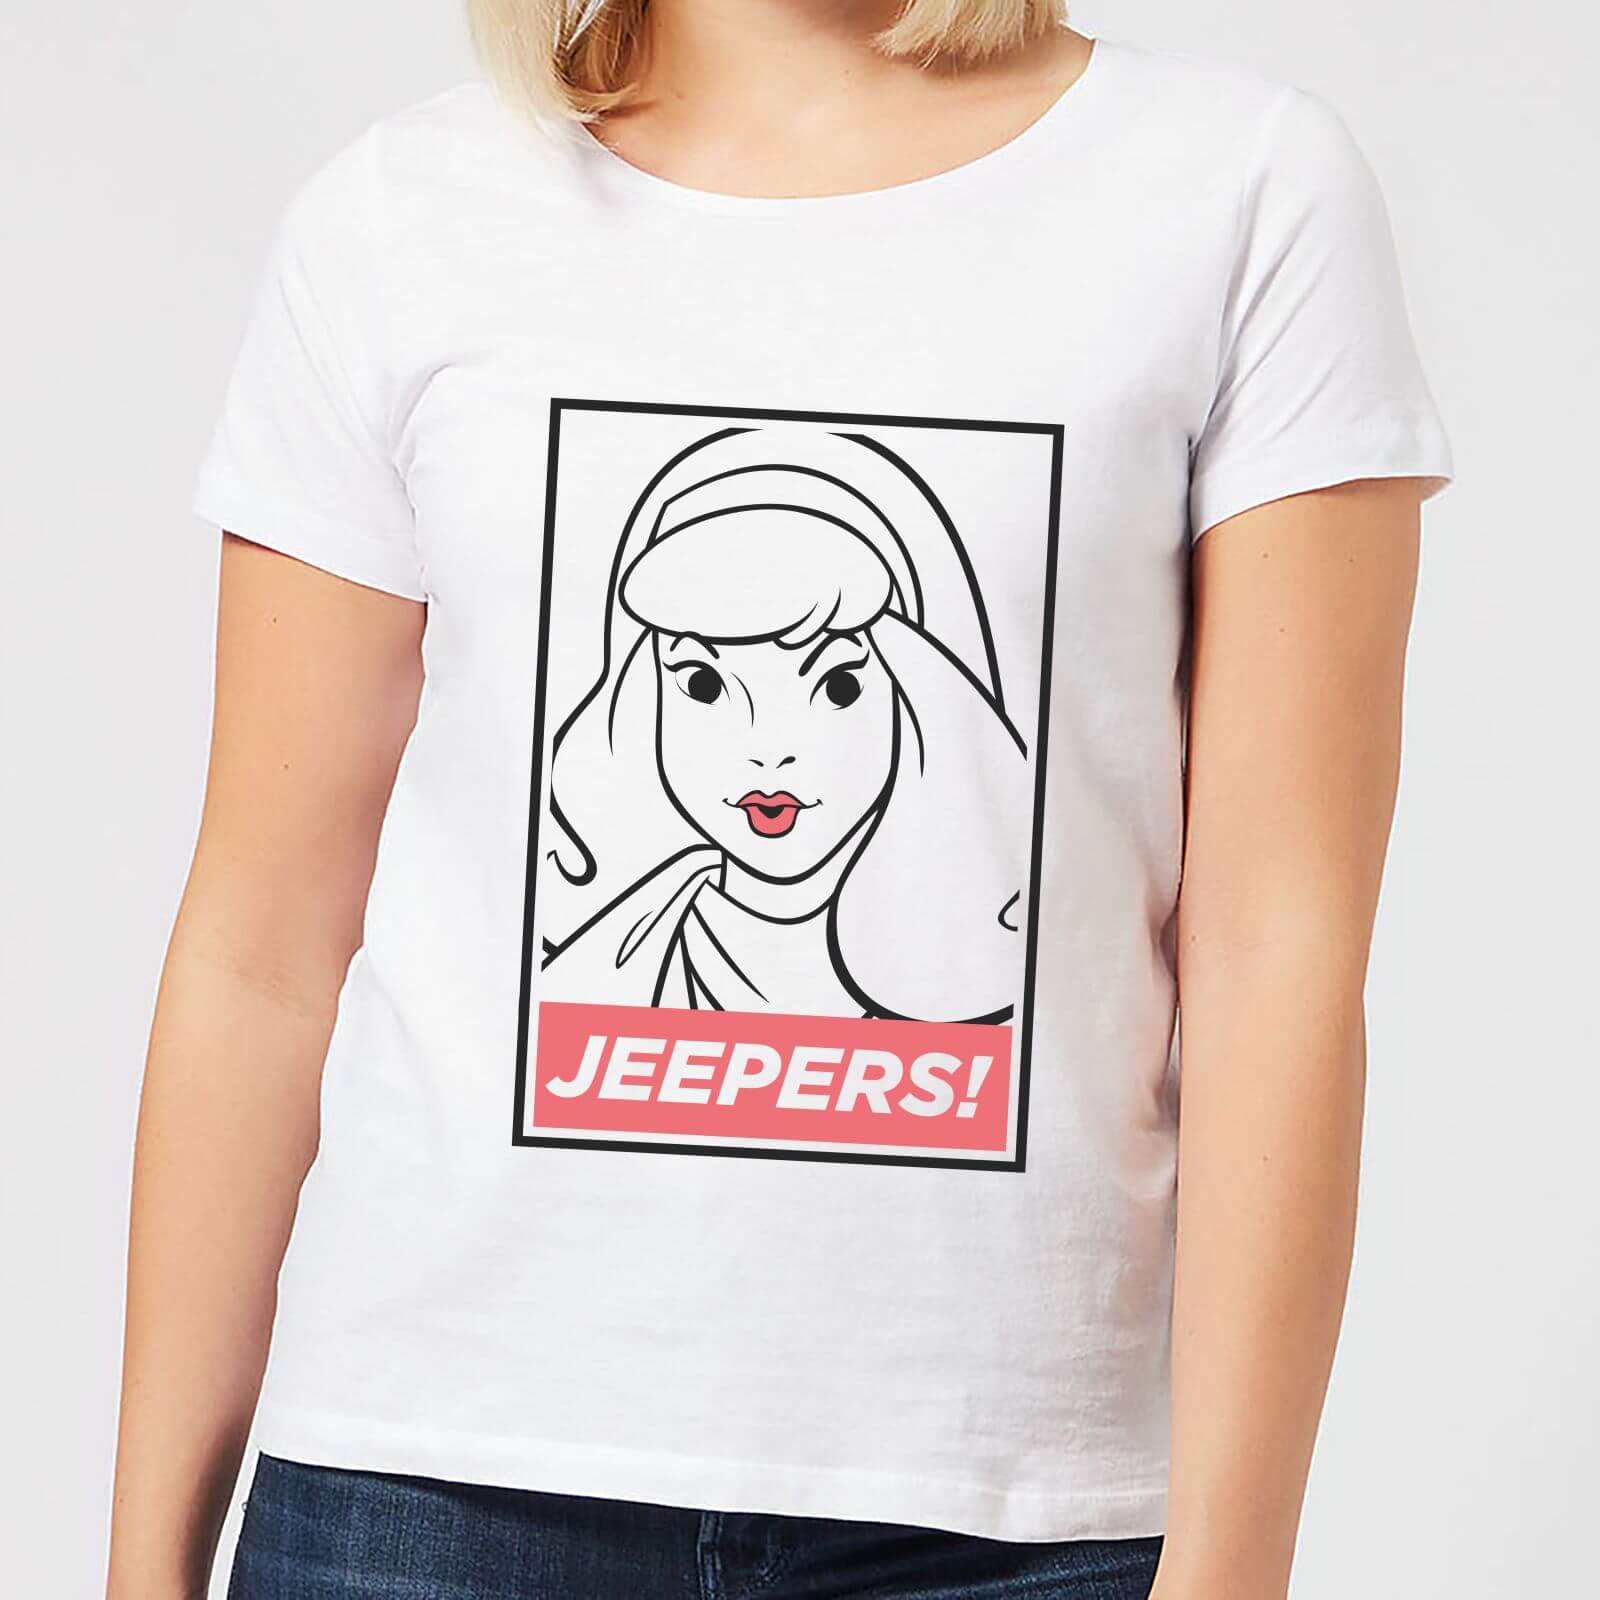 Scooby Doo Jeepers! Women's T-Shirt - White - M - Blanco